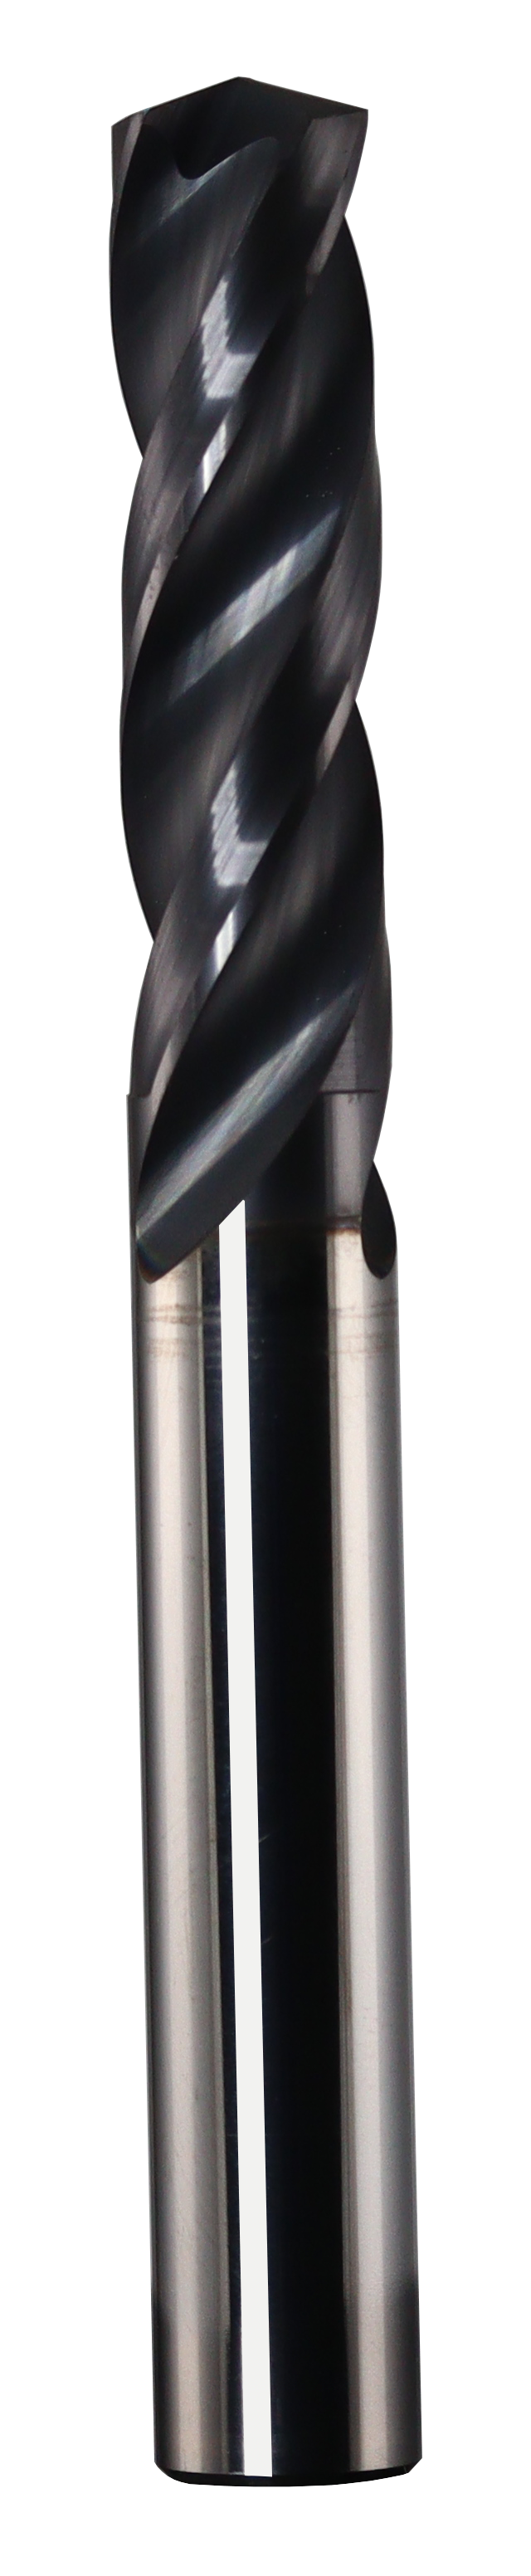 3.80mm Dia, 150 Degree Point, Solid Carbide Drill - 68973